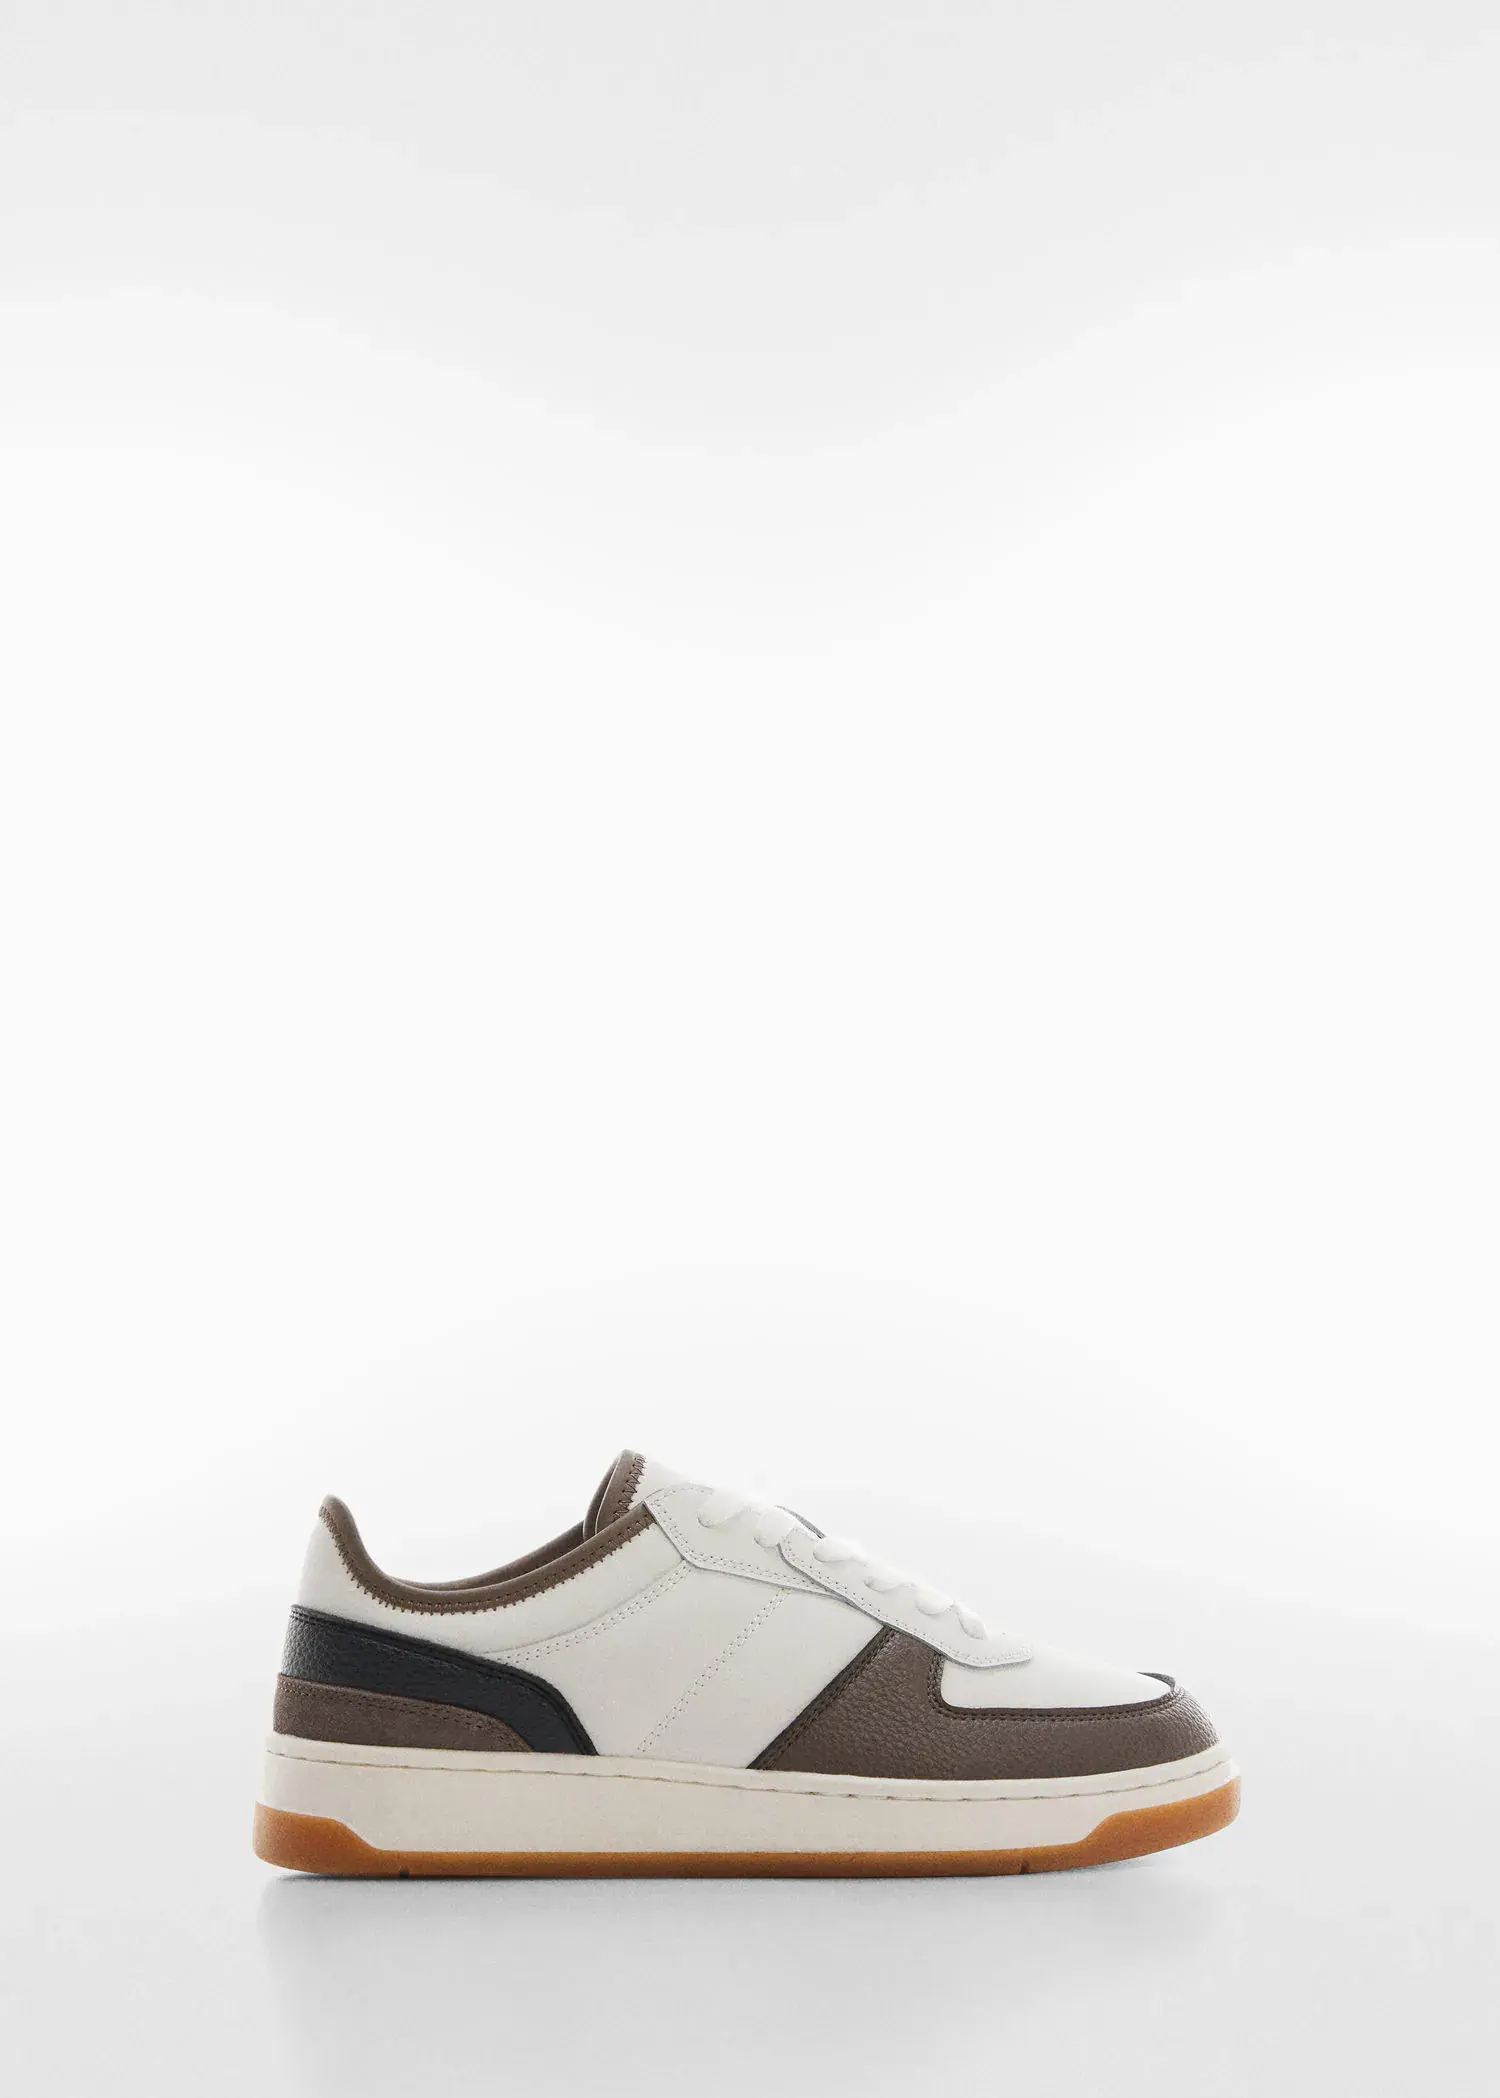 Mango Combined leather sneakers. 1